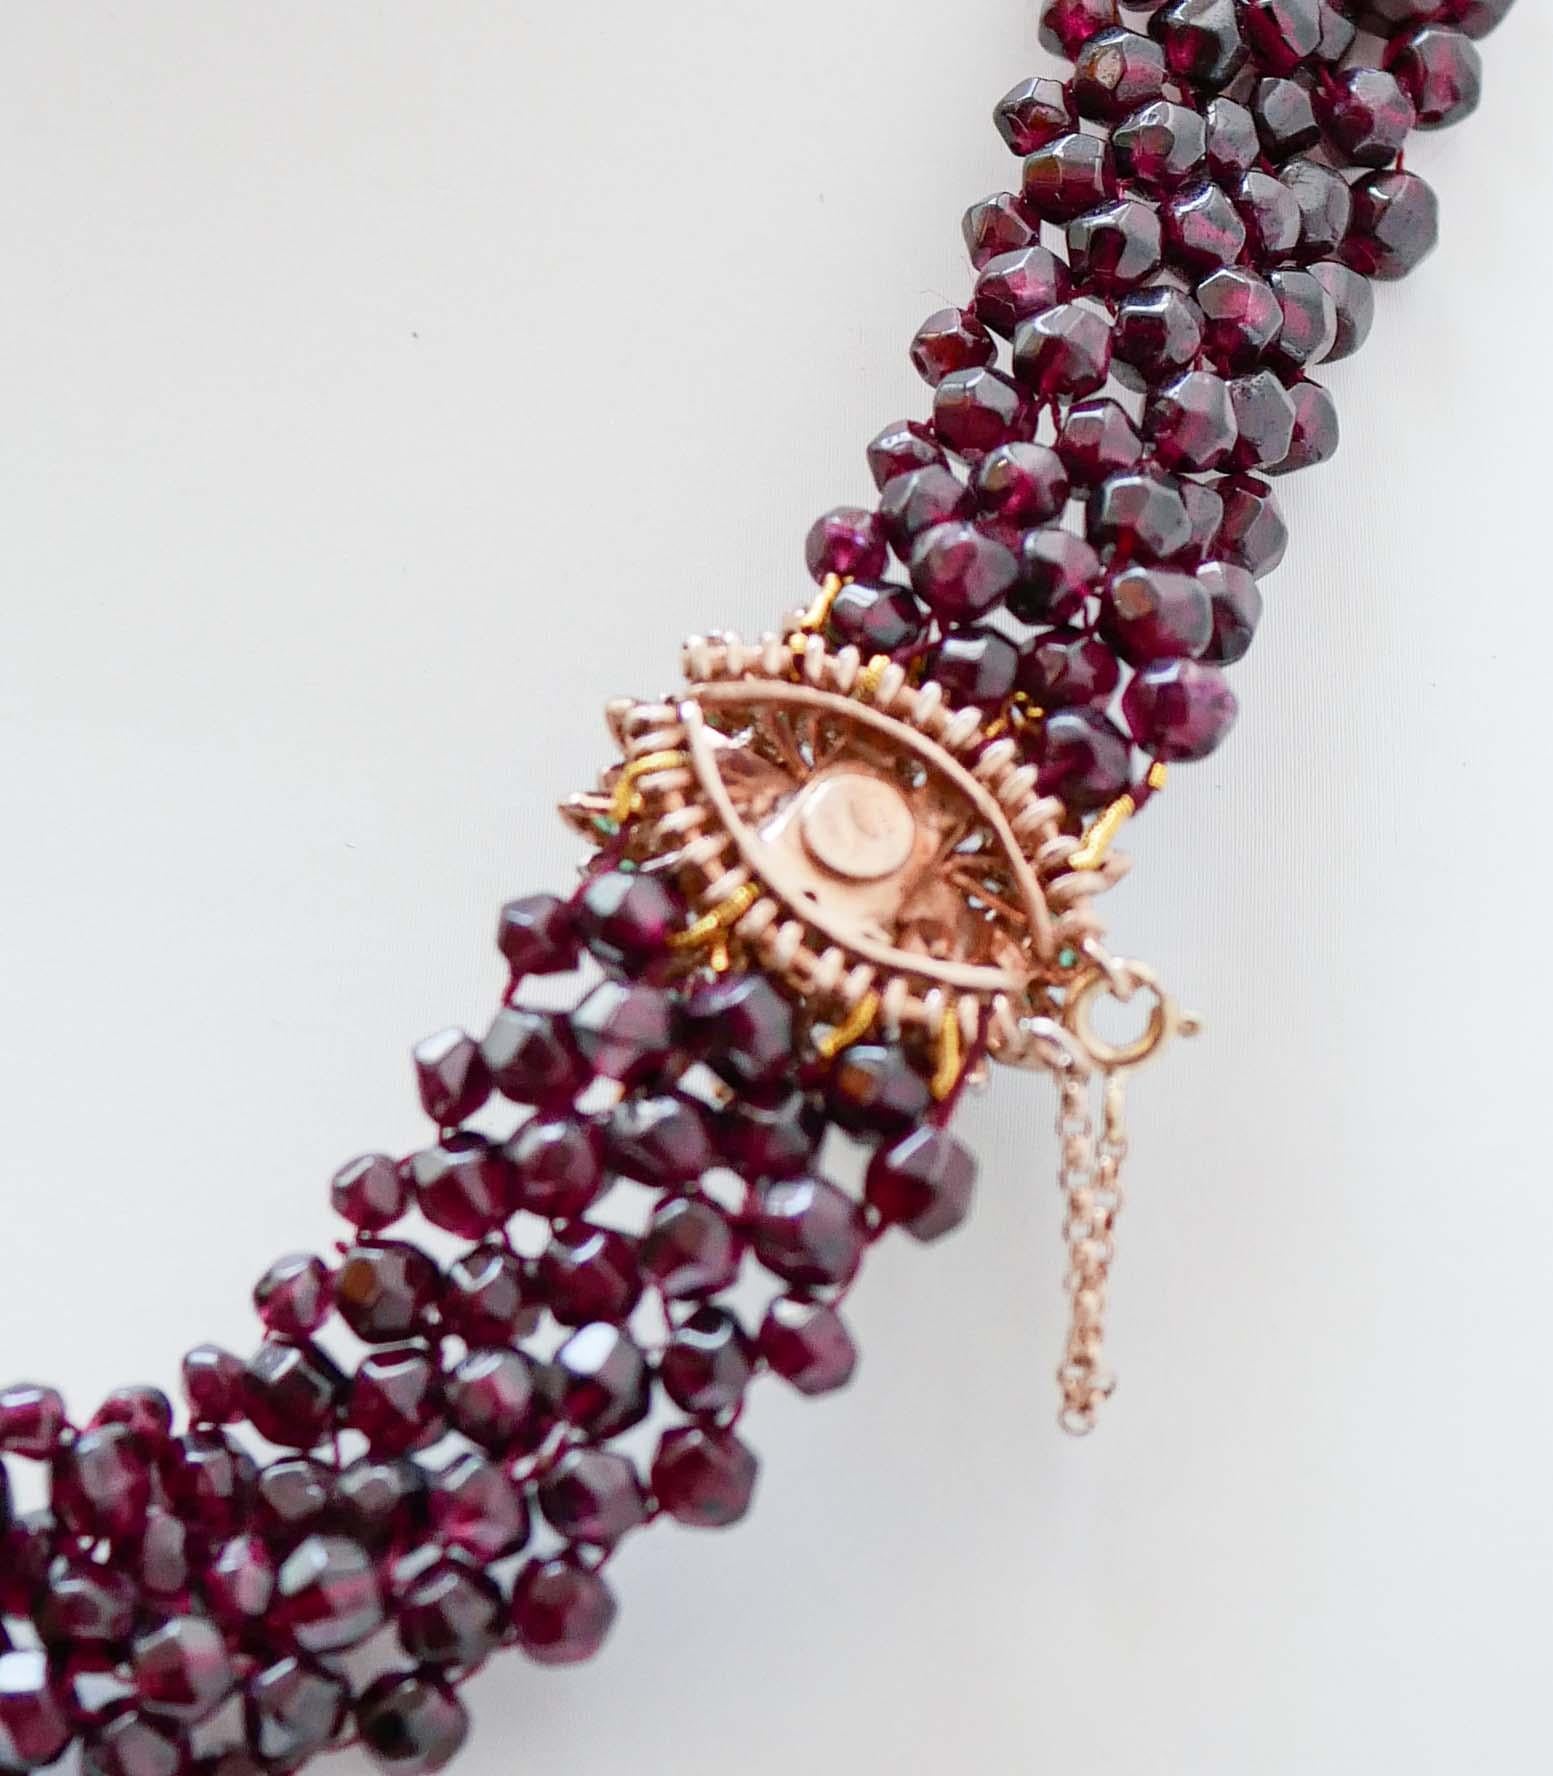 Mixed Cut Garnets, Hydrothermal Spinel, Diamonds, Pearl, Rose Gold and Silver Necklace. For Sale